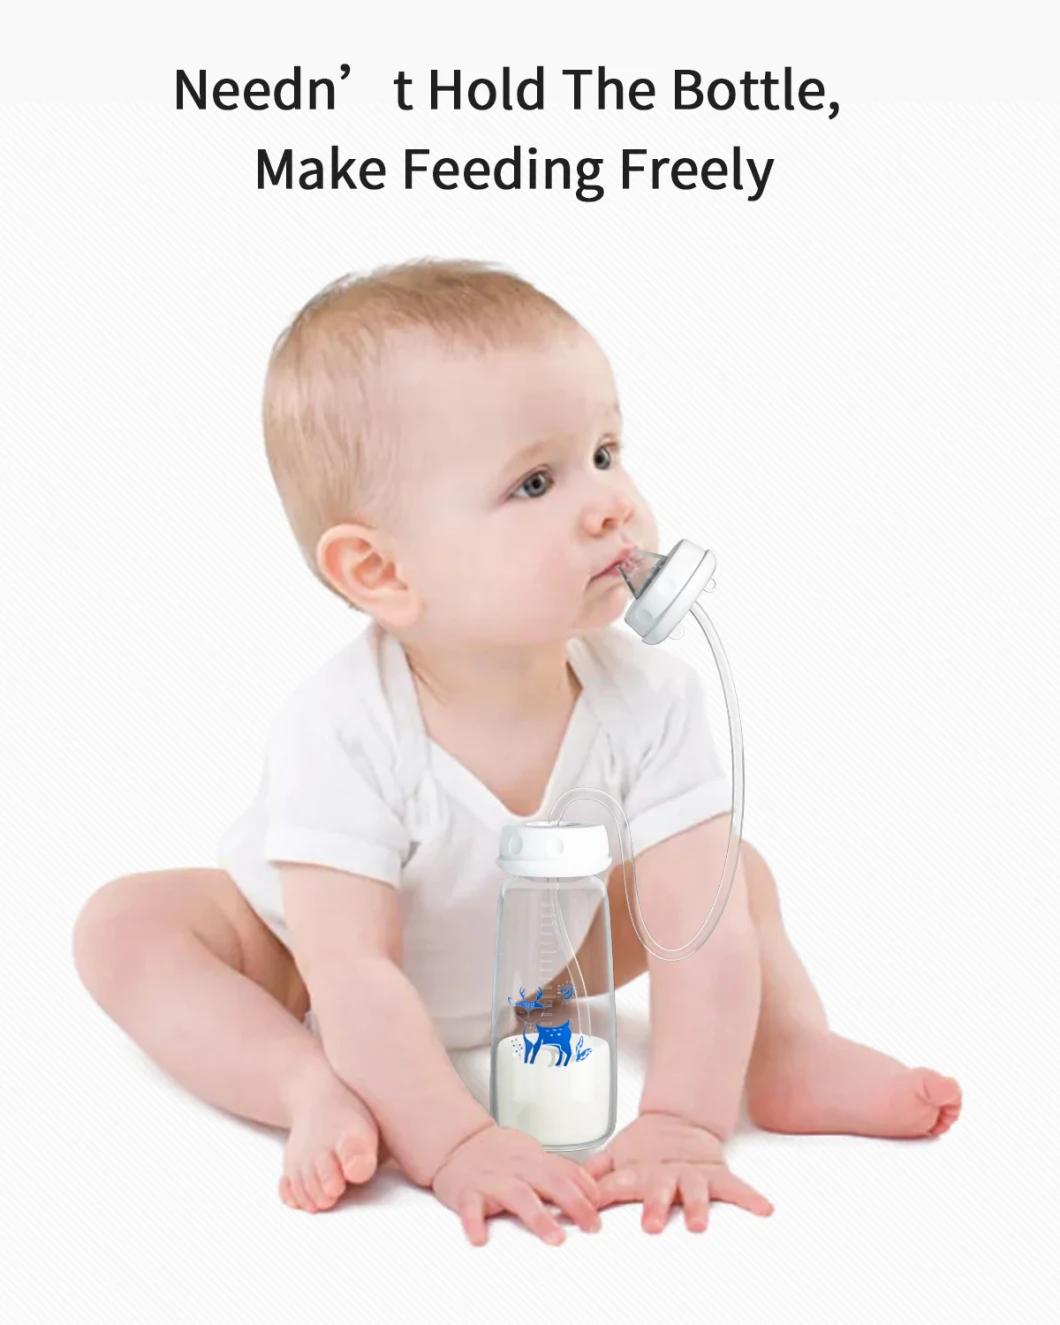 240ml Infant Feeder Standard Neck Baby Bottle with Liquid Silicone Teat